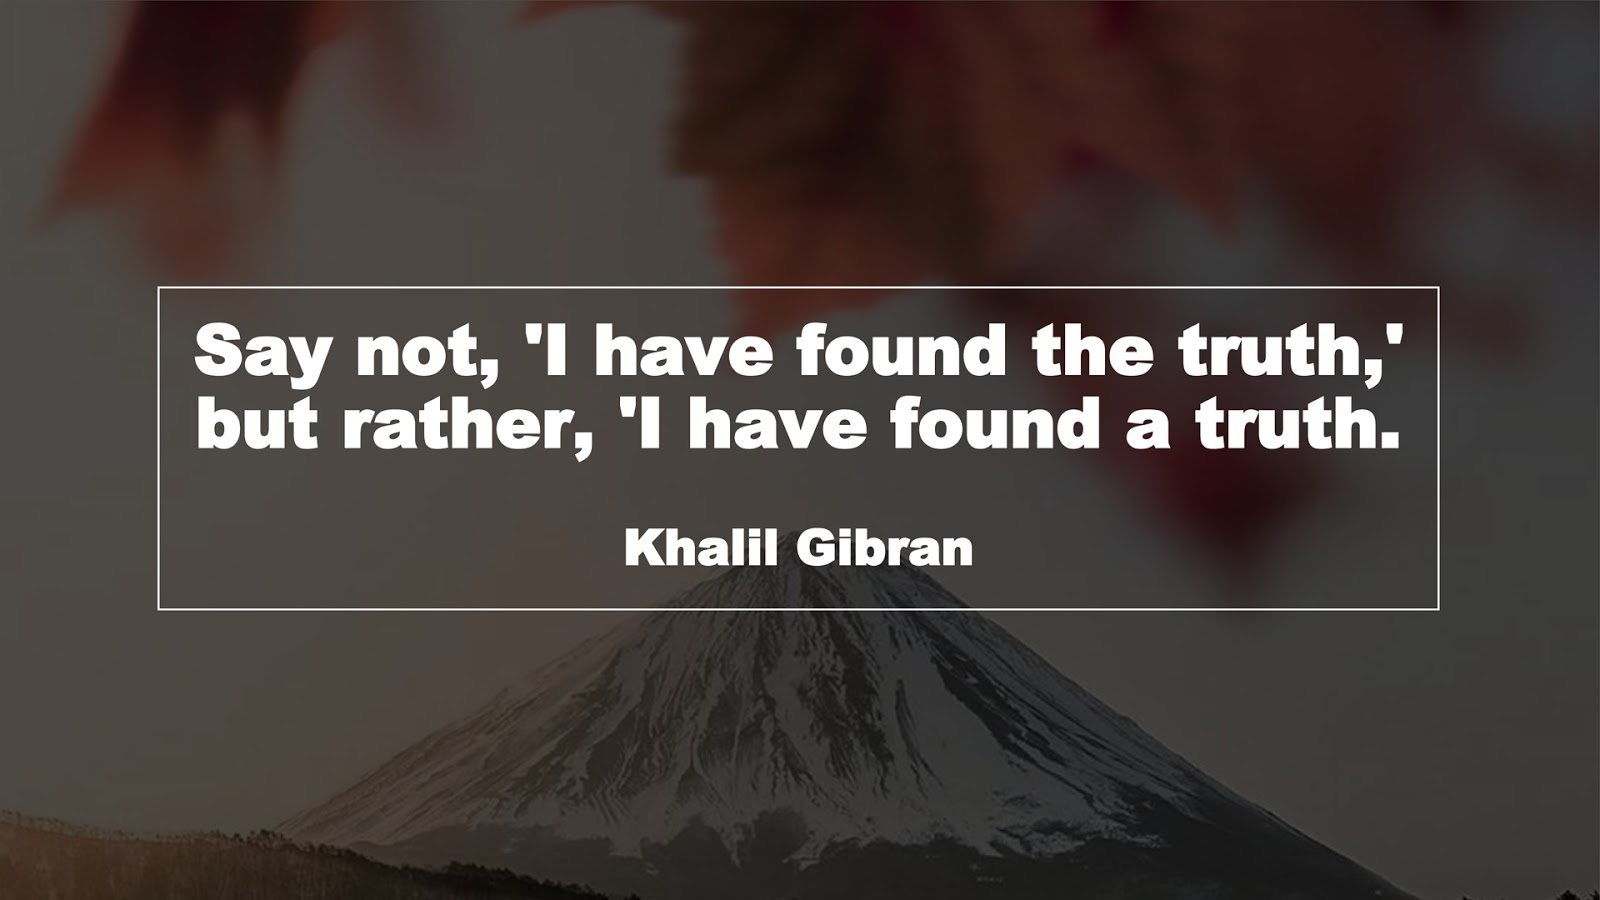 Say not, 'I have found the truth,' but rather, 'I have found a truth. (Khalil Gibran)